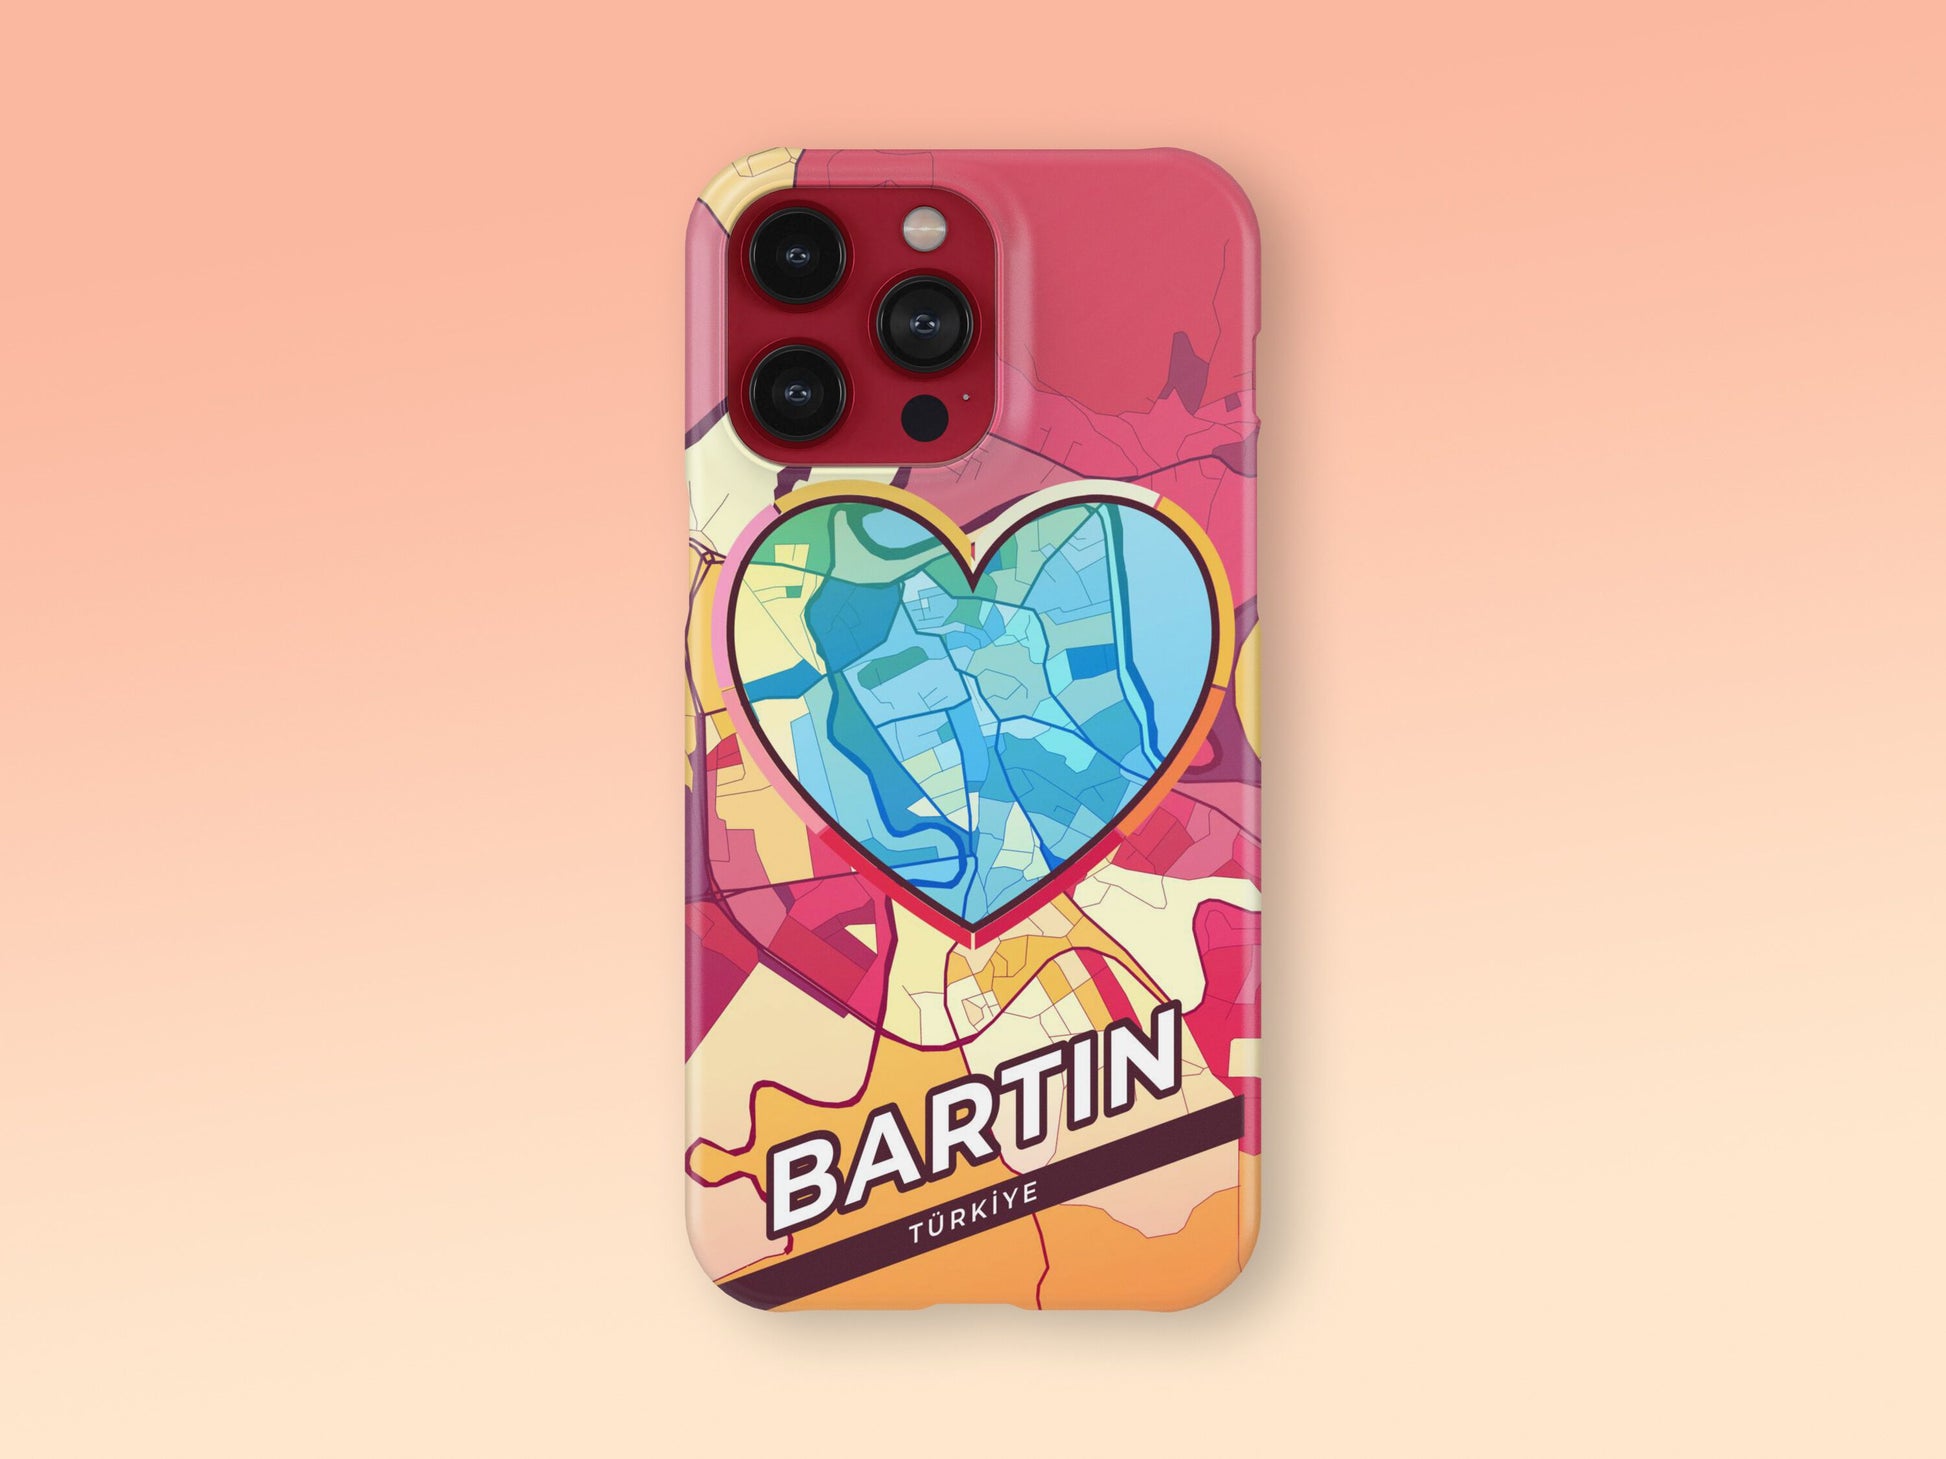 Bartın Turkey slim phone case with colorful icon. Birthday, wedding or housewarming gift. Couple match cases. 2